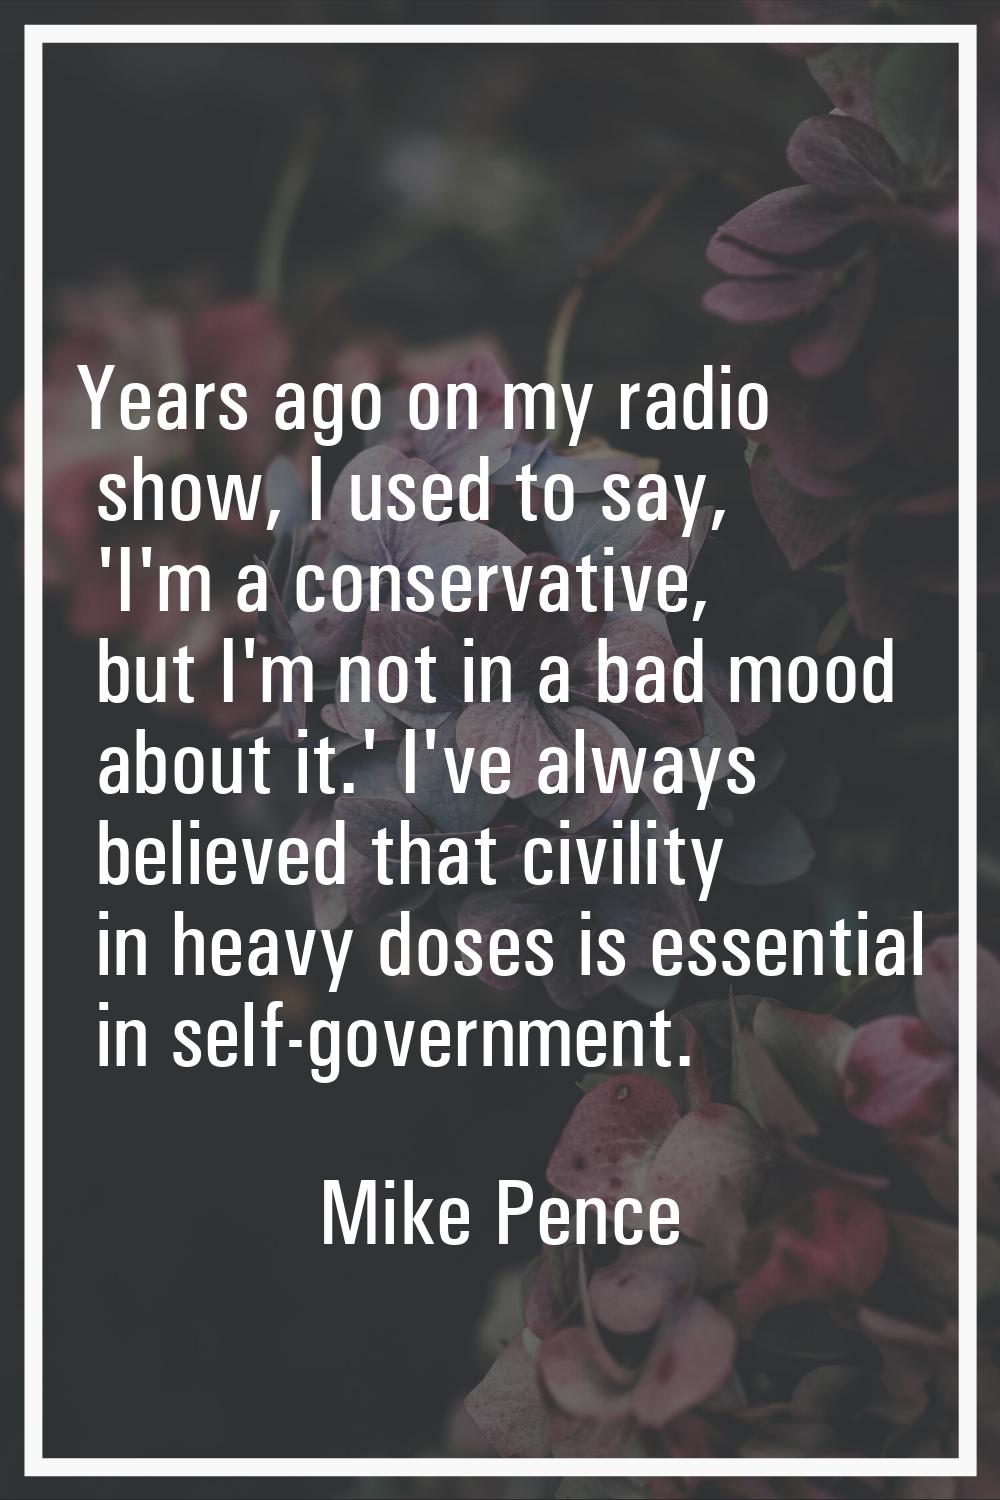 Years ago on my radio show, I used to say, 'I'm a conservative, but I'm not in a bad mood about it.